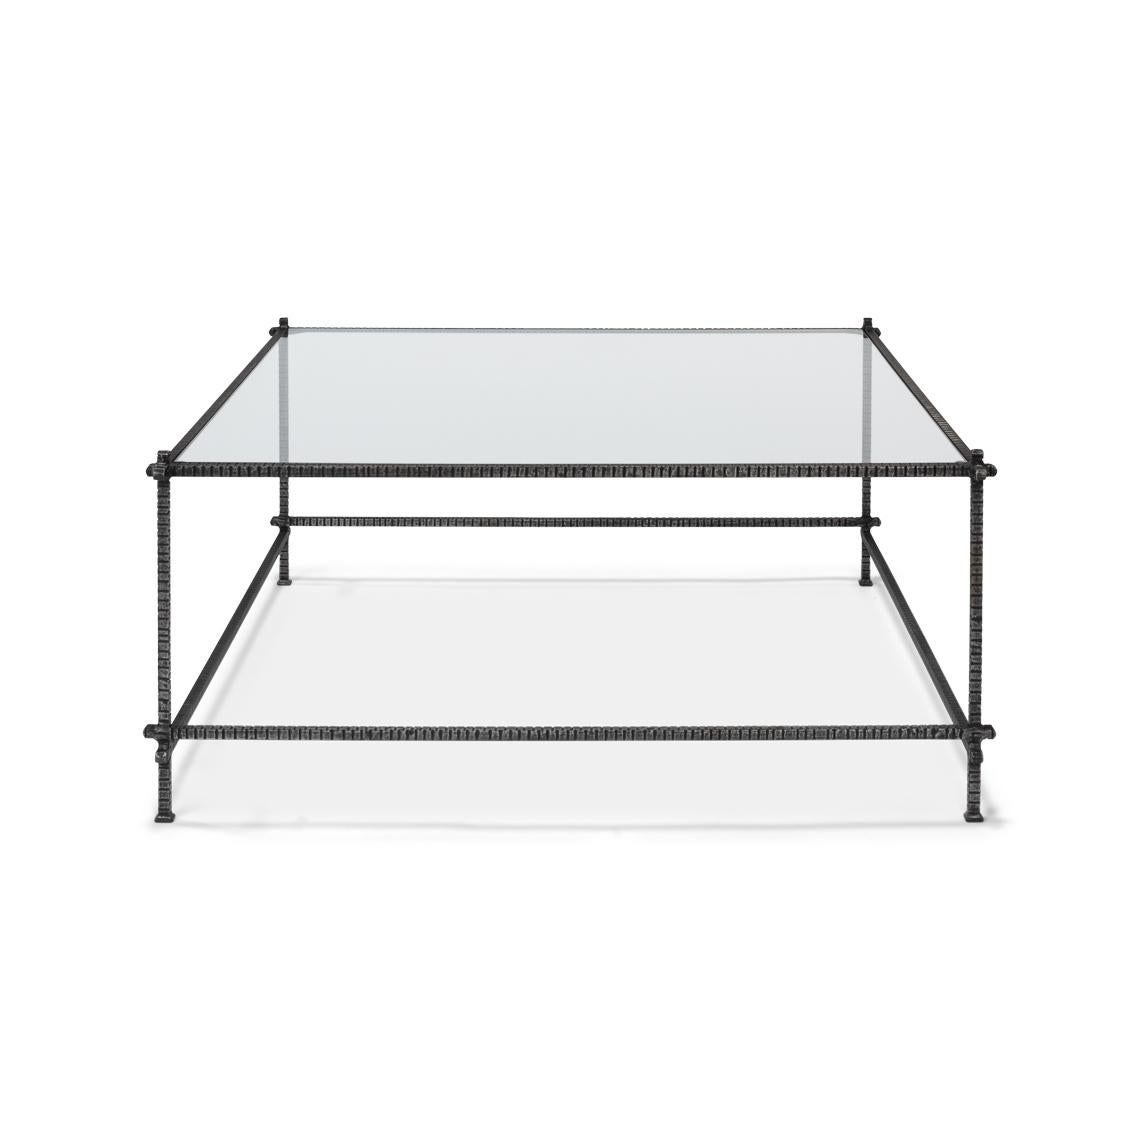 This coffee table strikes a perfect balance between modern design and functional artistry. The sleek, clear glass top is a canvas for your coffee table books, floral arrangements, or your favorite decorative pieces.

The frame, welded and hand-cut